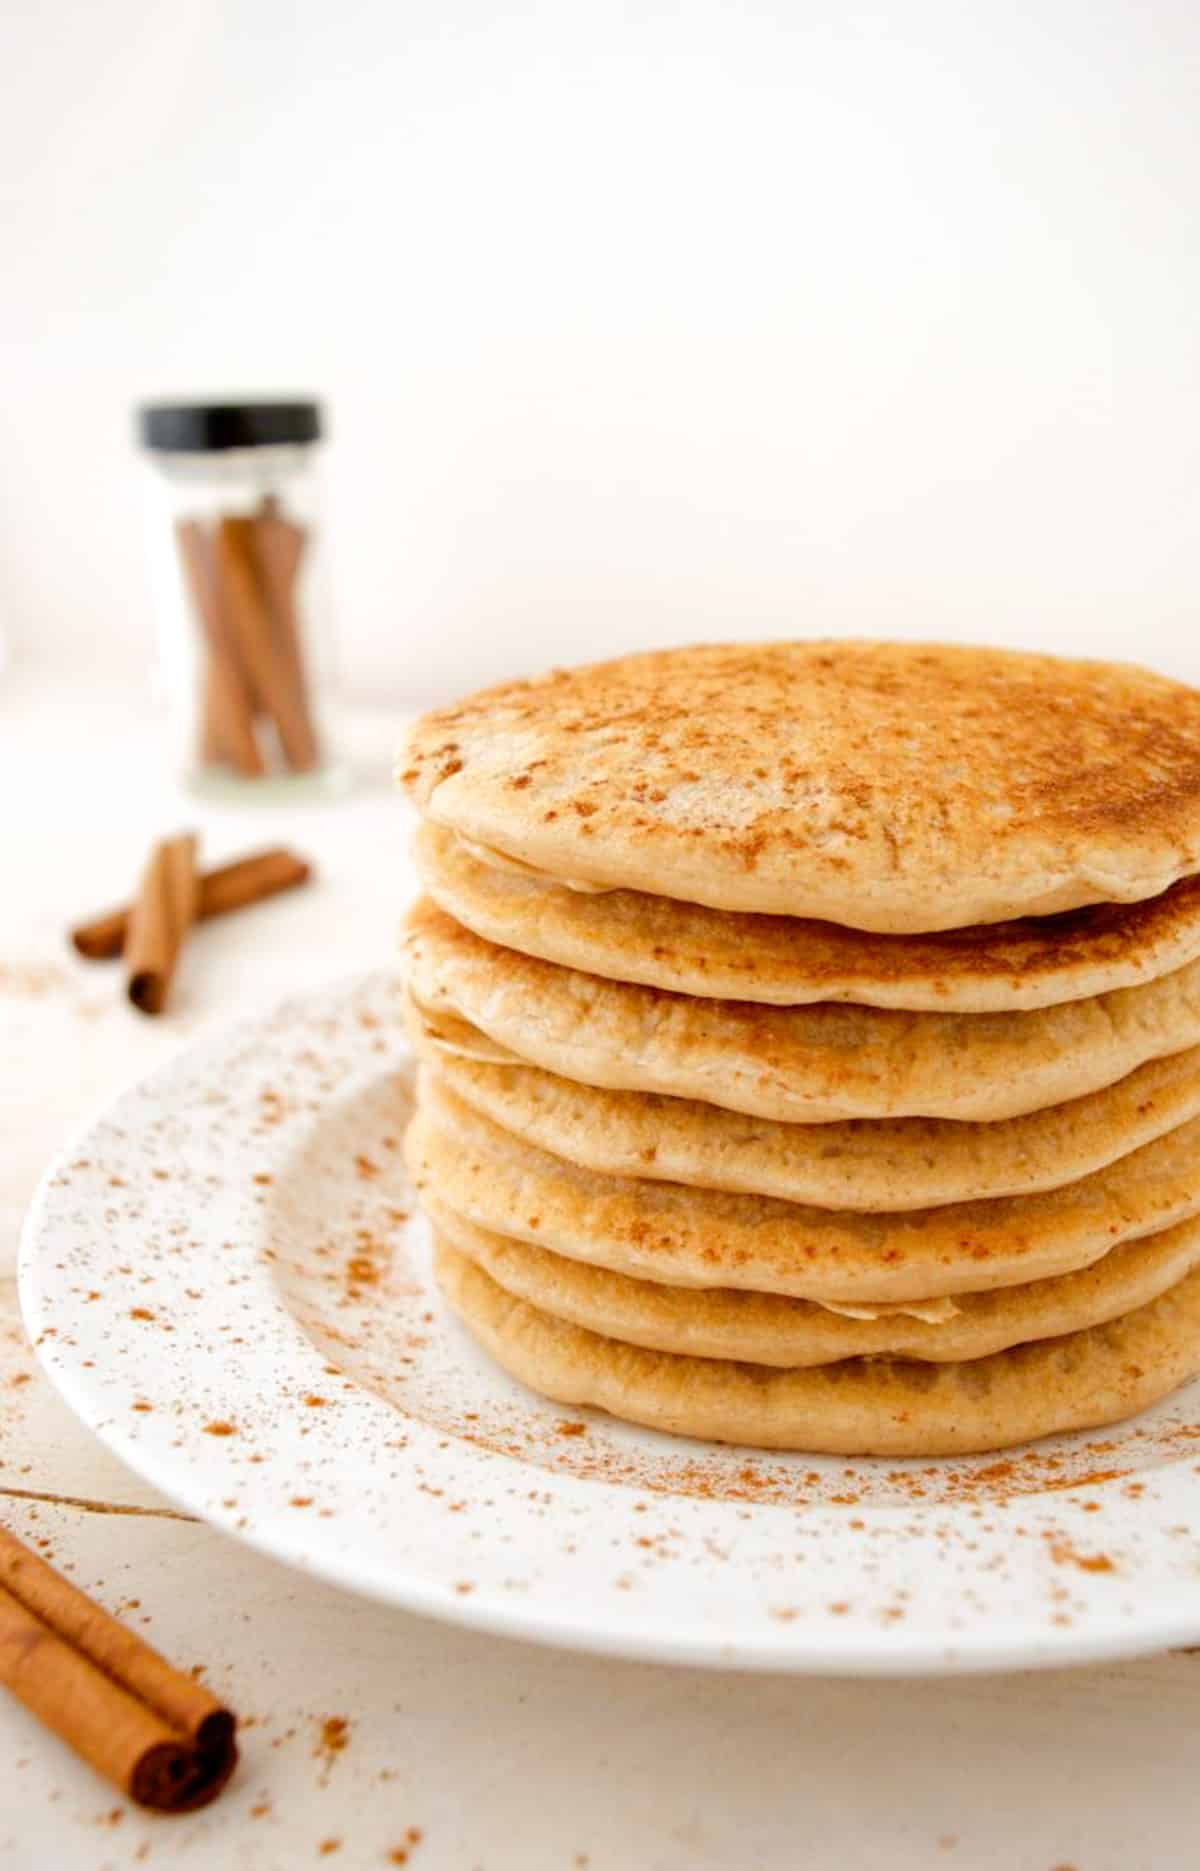 A stack of cinnamon pancakes on a white plate with a jar of cinnamon stick in the background.